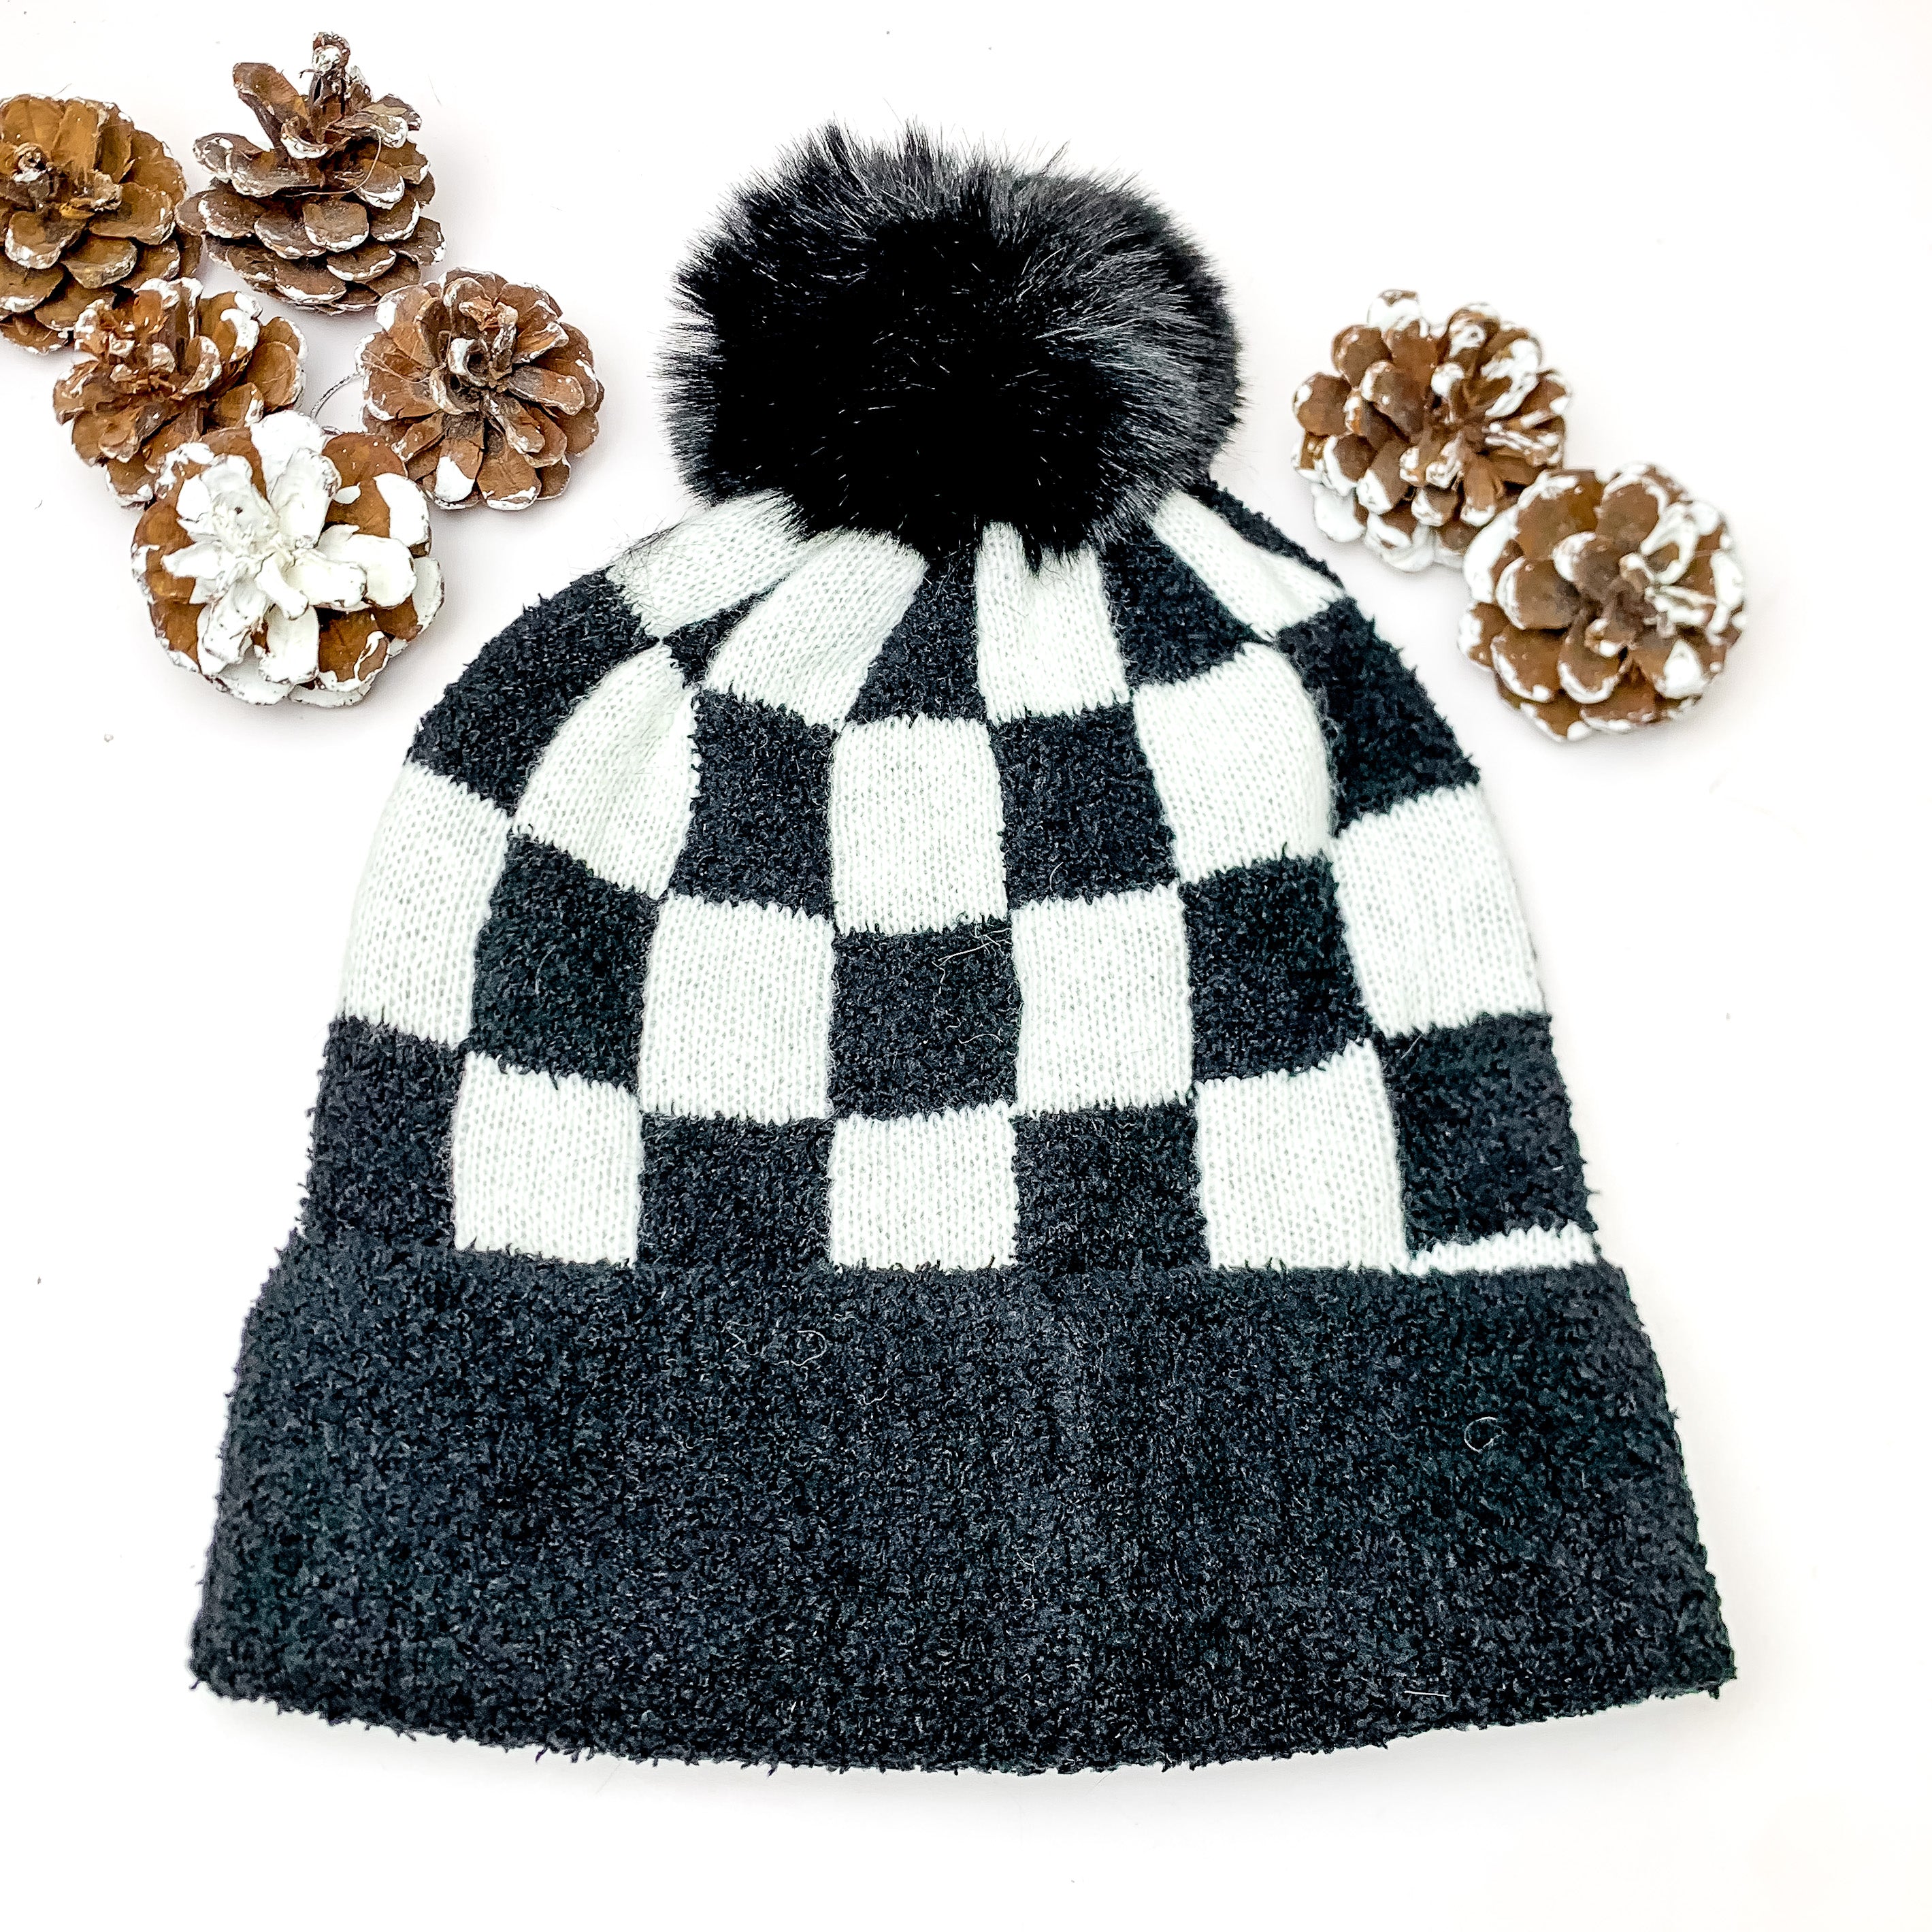 Checkered Beanie in Black and White. This beanie is pictured on a white background with pinecones around it.